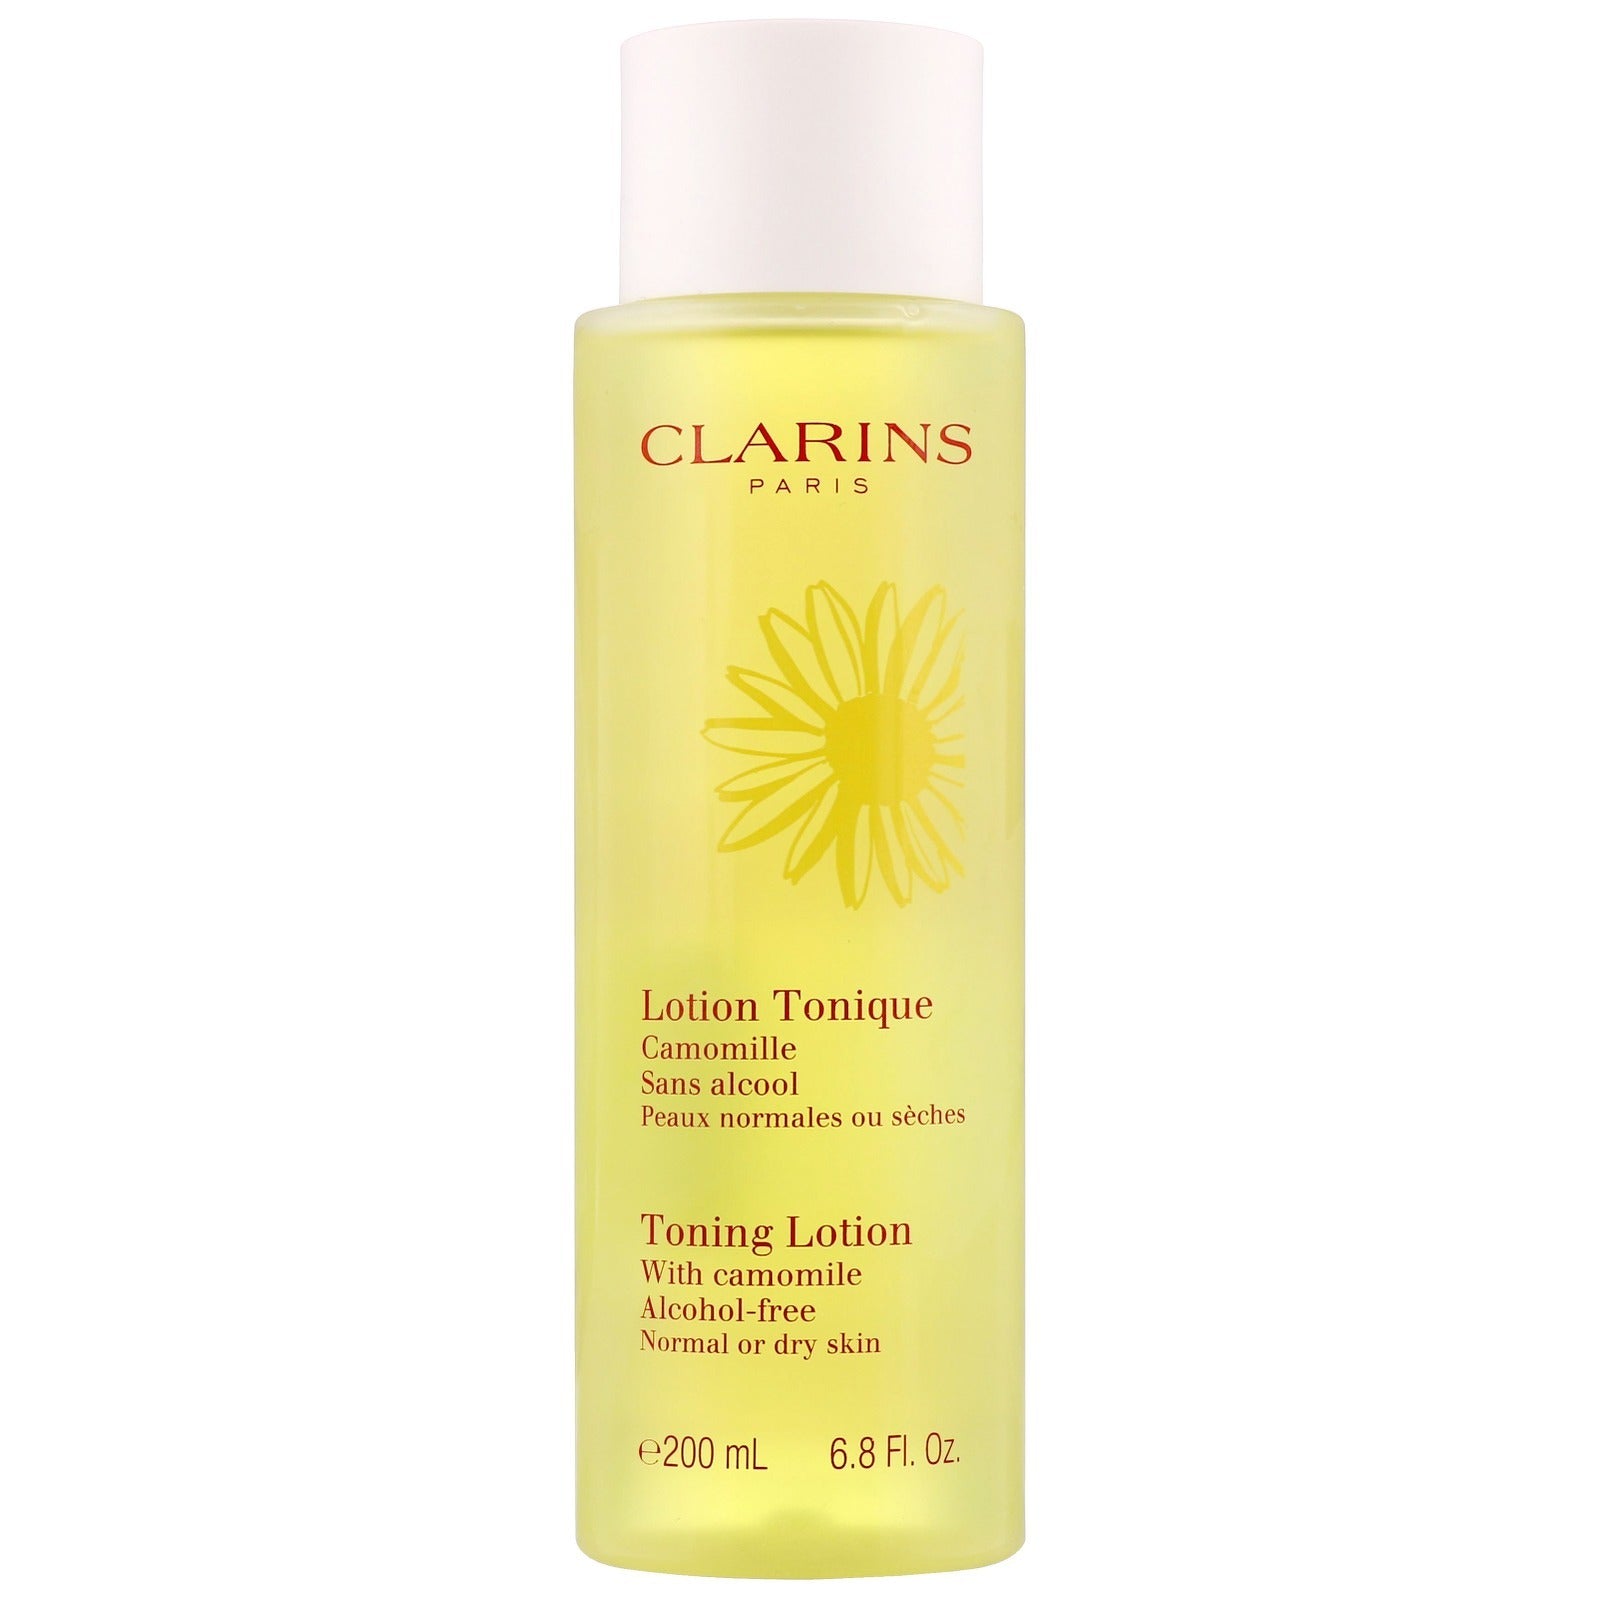 Clarins Toning Lotion With Camomile (200ml) 溫和爽膚露 (200ml)